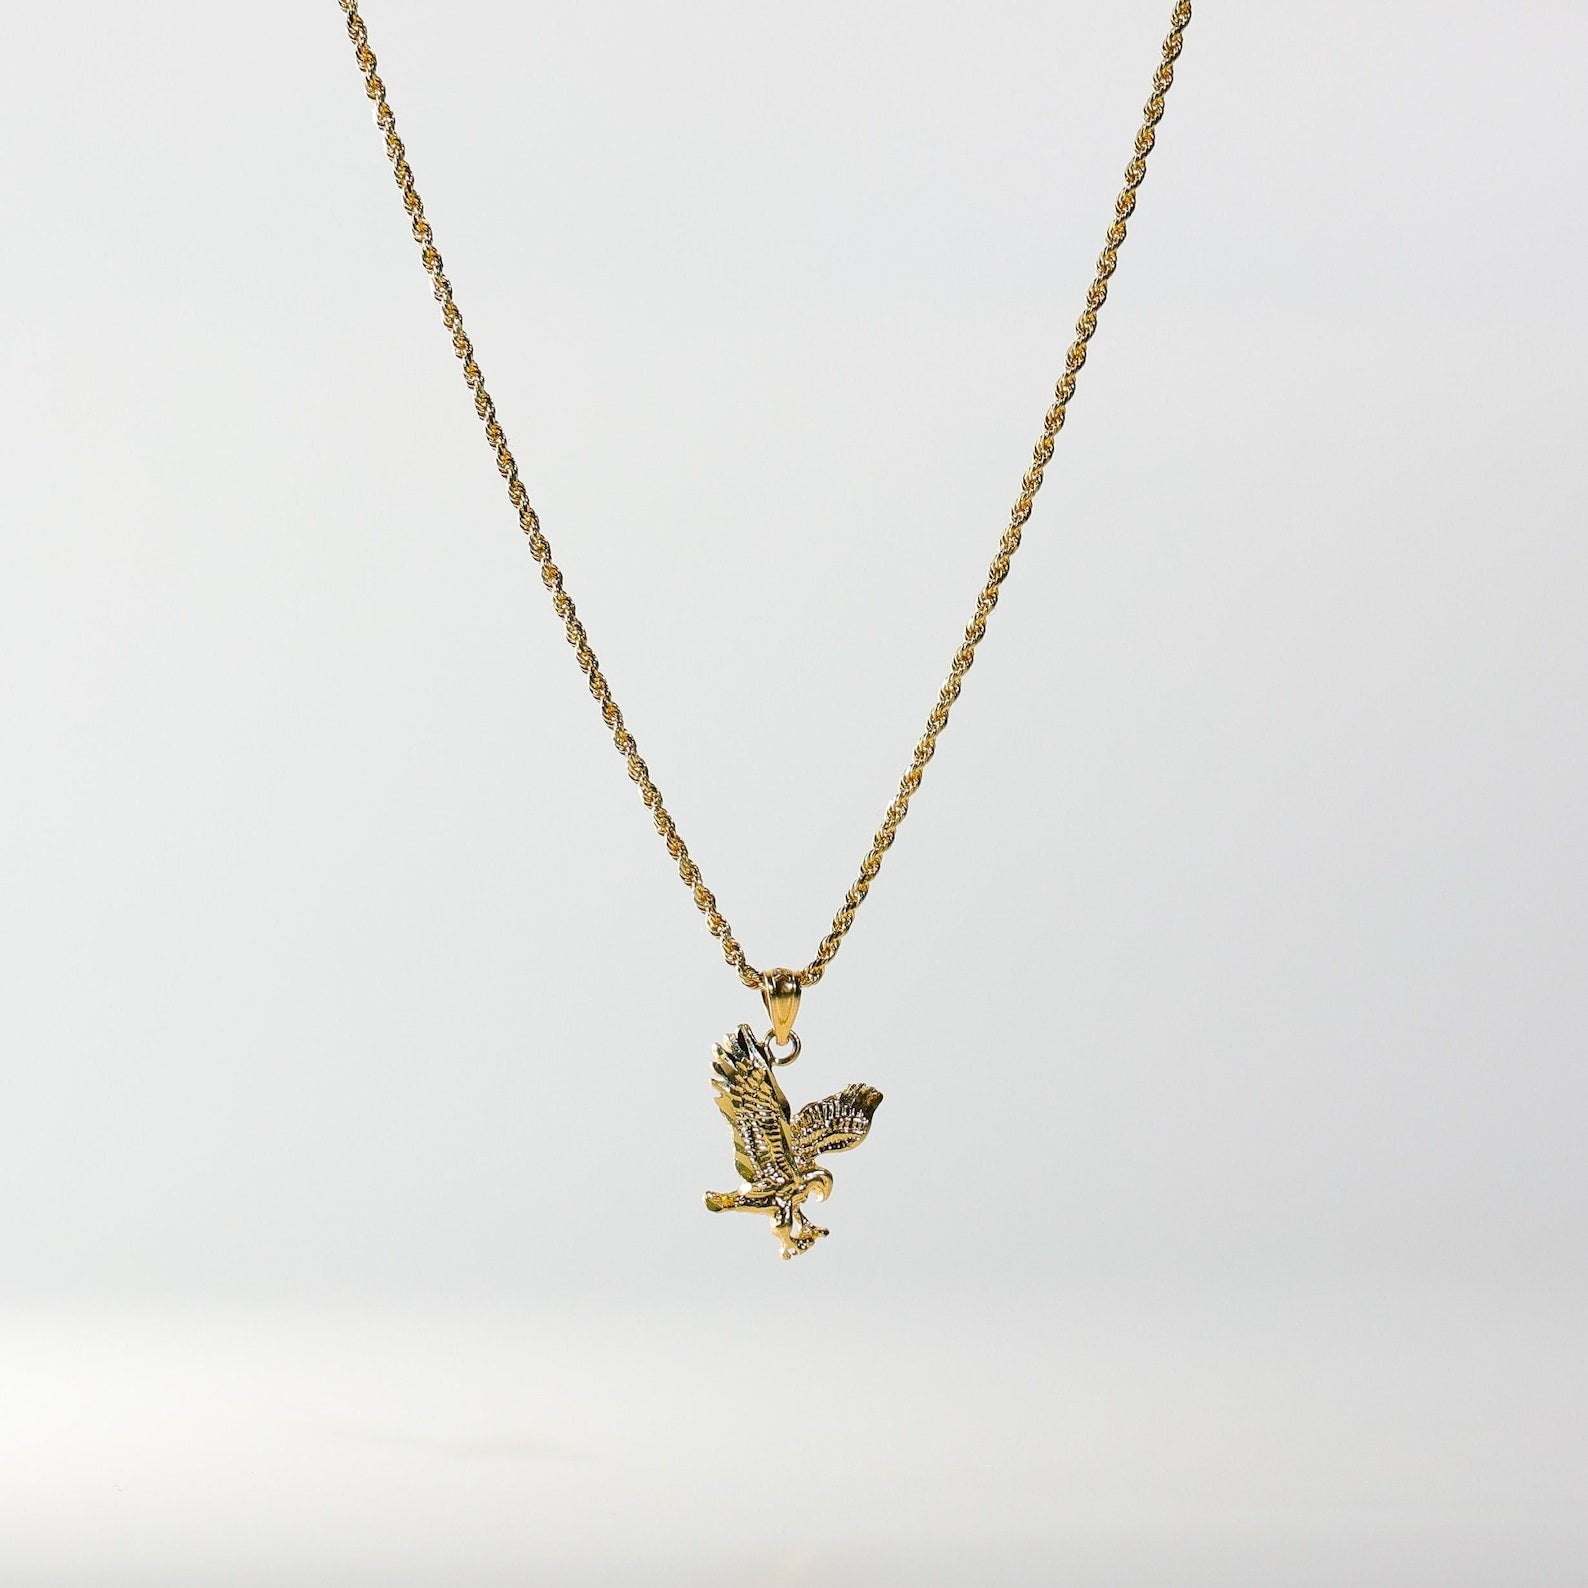 Gold Eagle Pendant Model-1595 - Charlie & Co. Jewelry